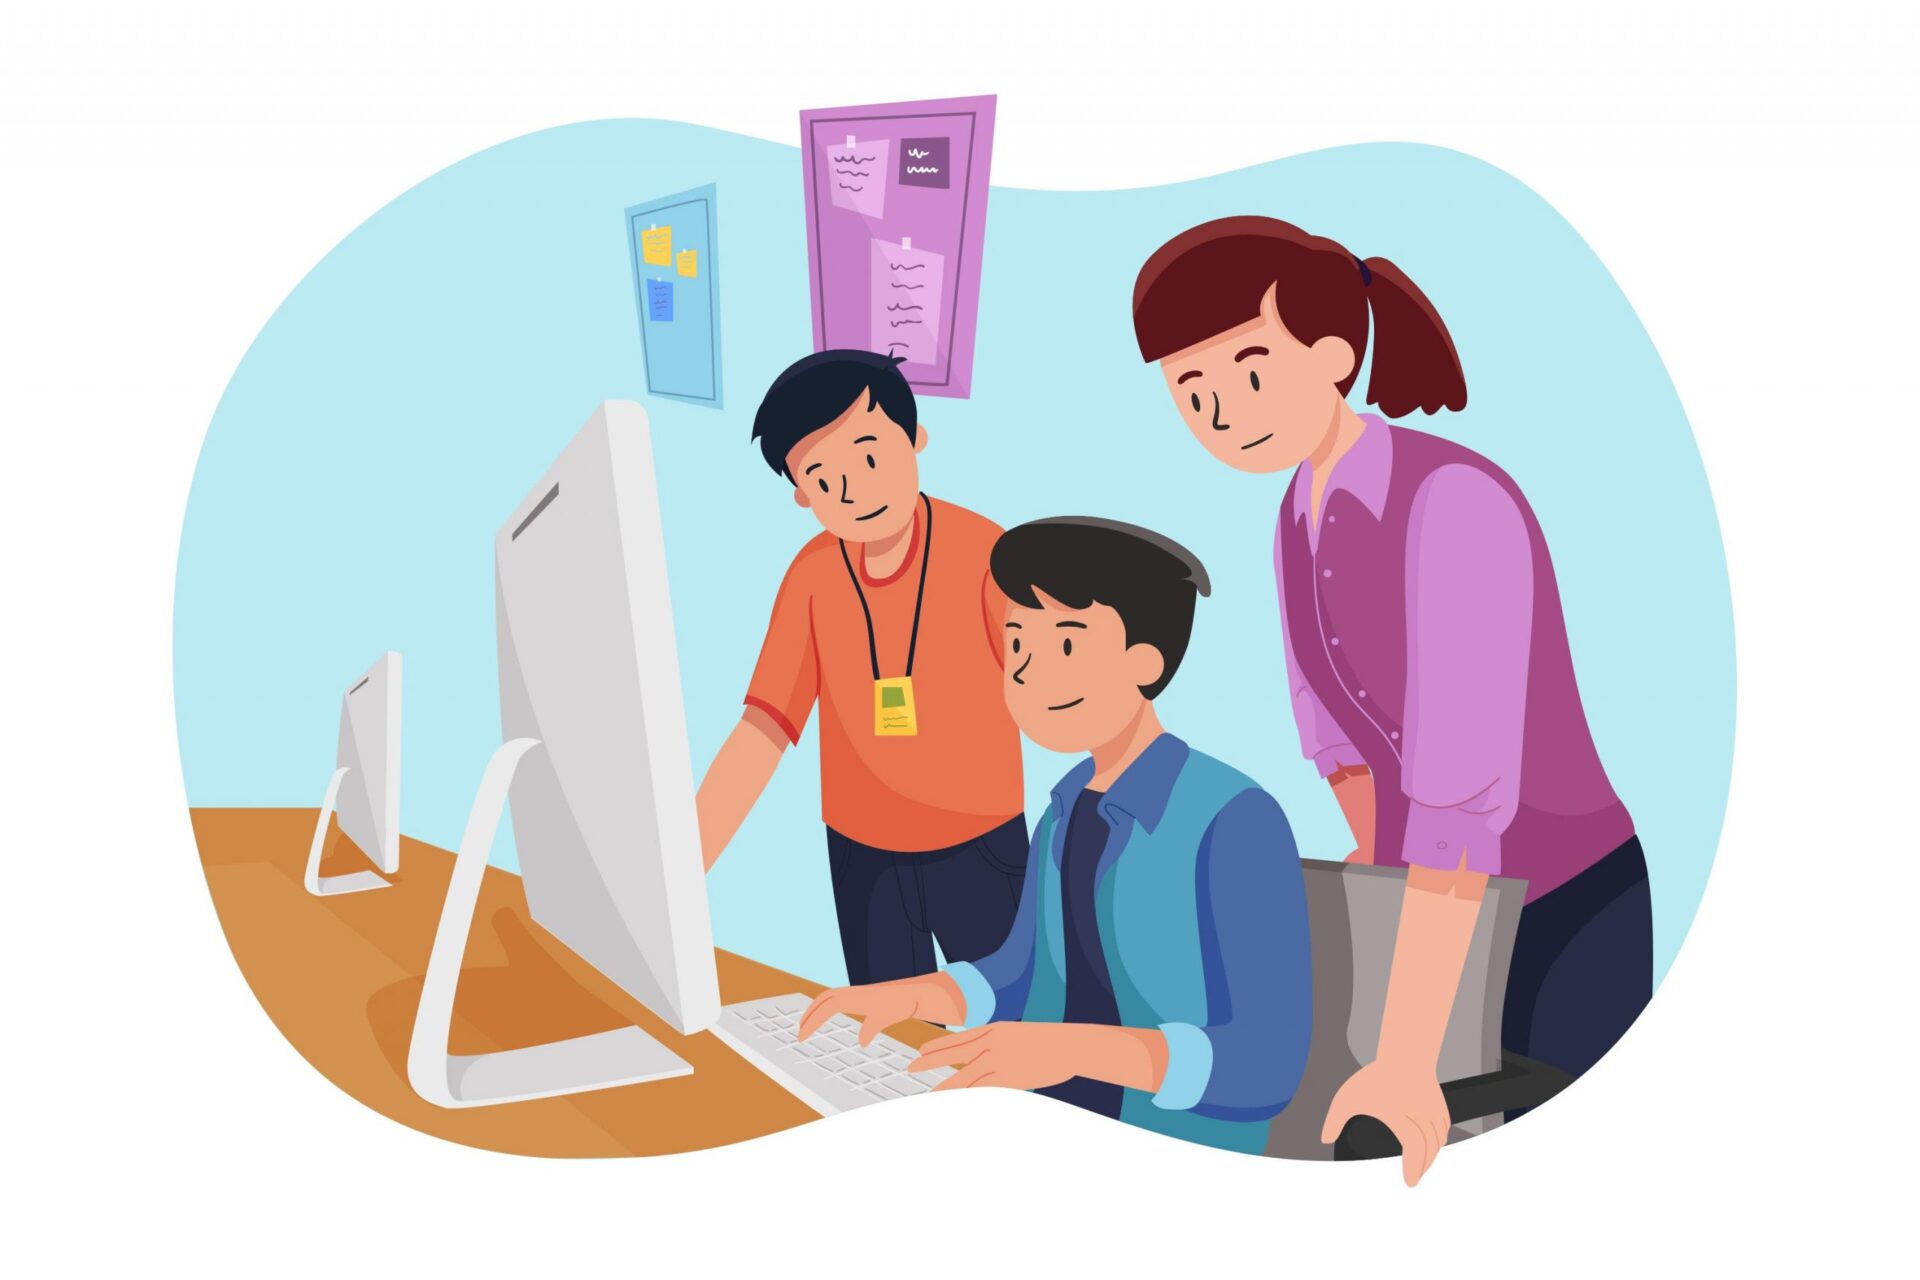 An illustration of three colleagues collaborating in an office. One person, seated at a desk, is typing on a computer while two others stand beside them, offering support and guidance.